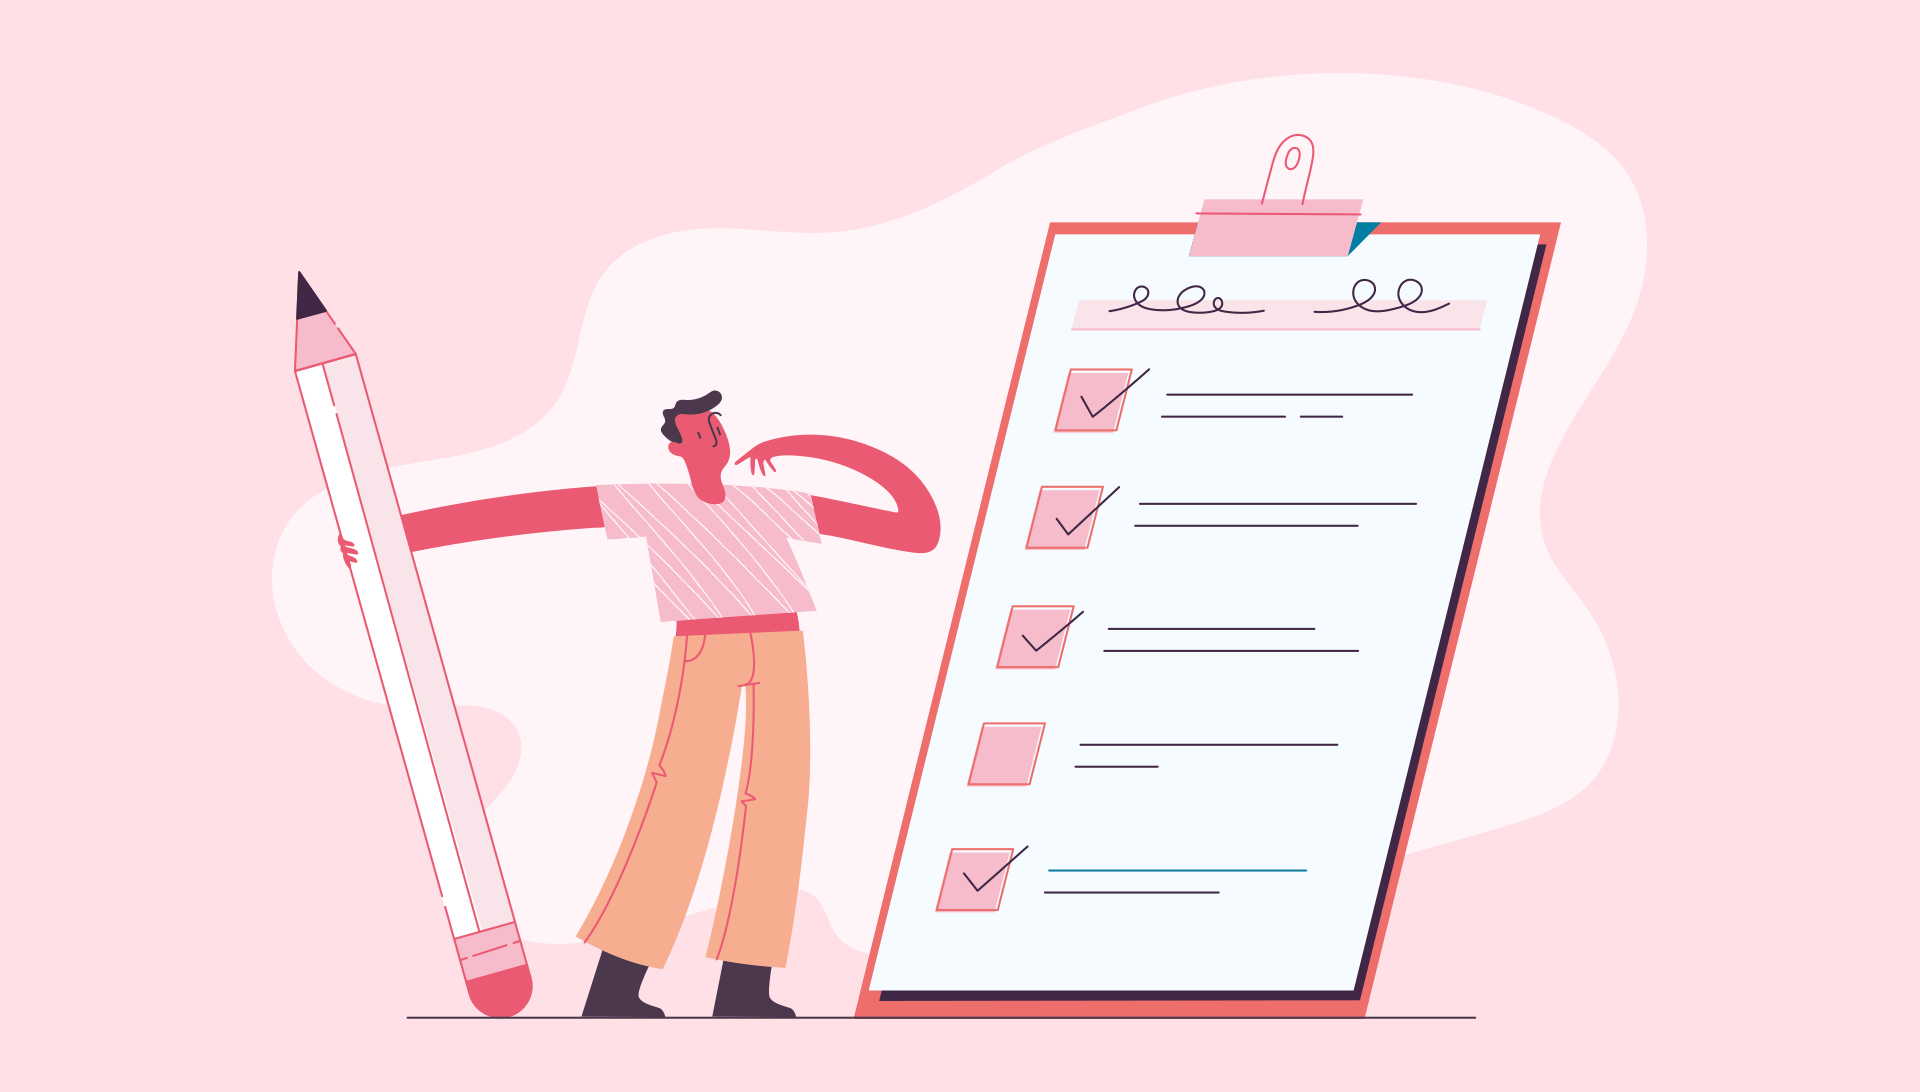 An illustration of a person holding a pencil while considering a checklist on a giant clipboard